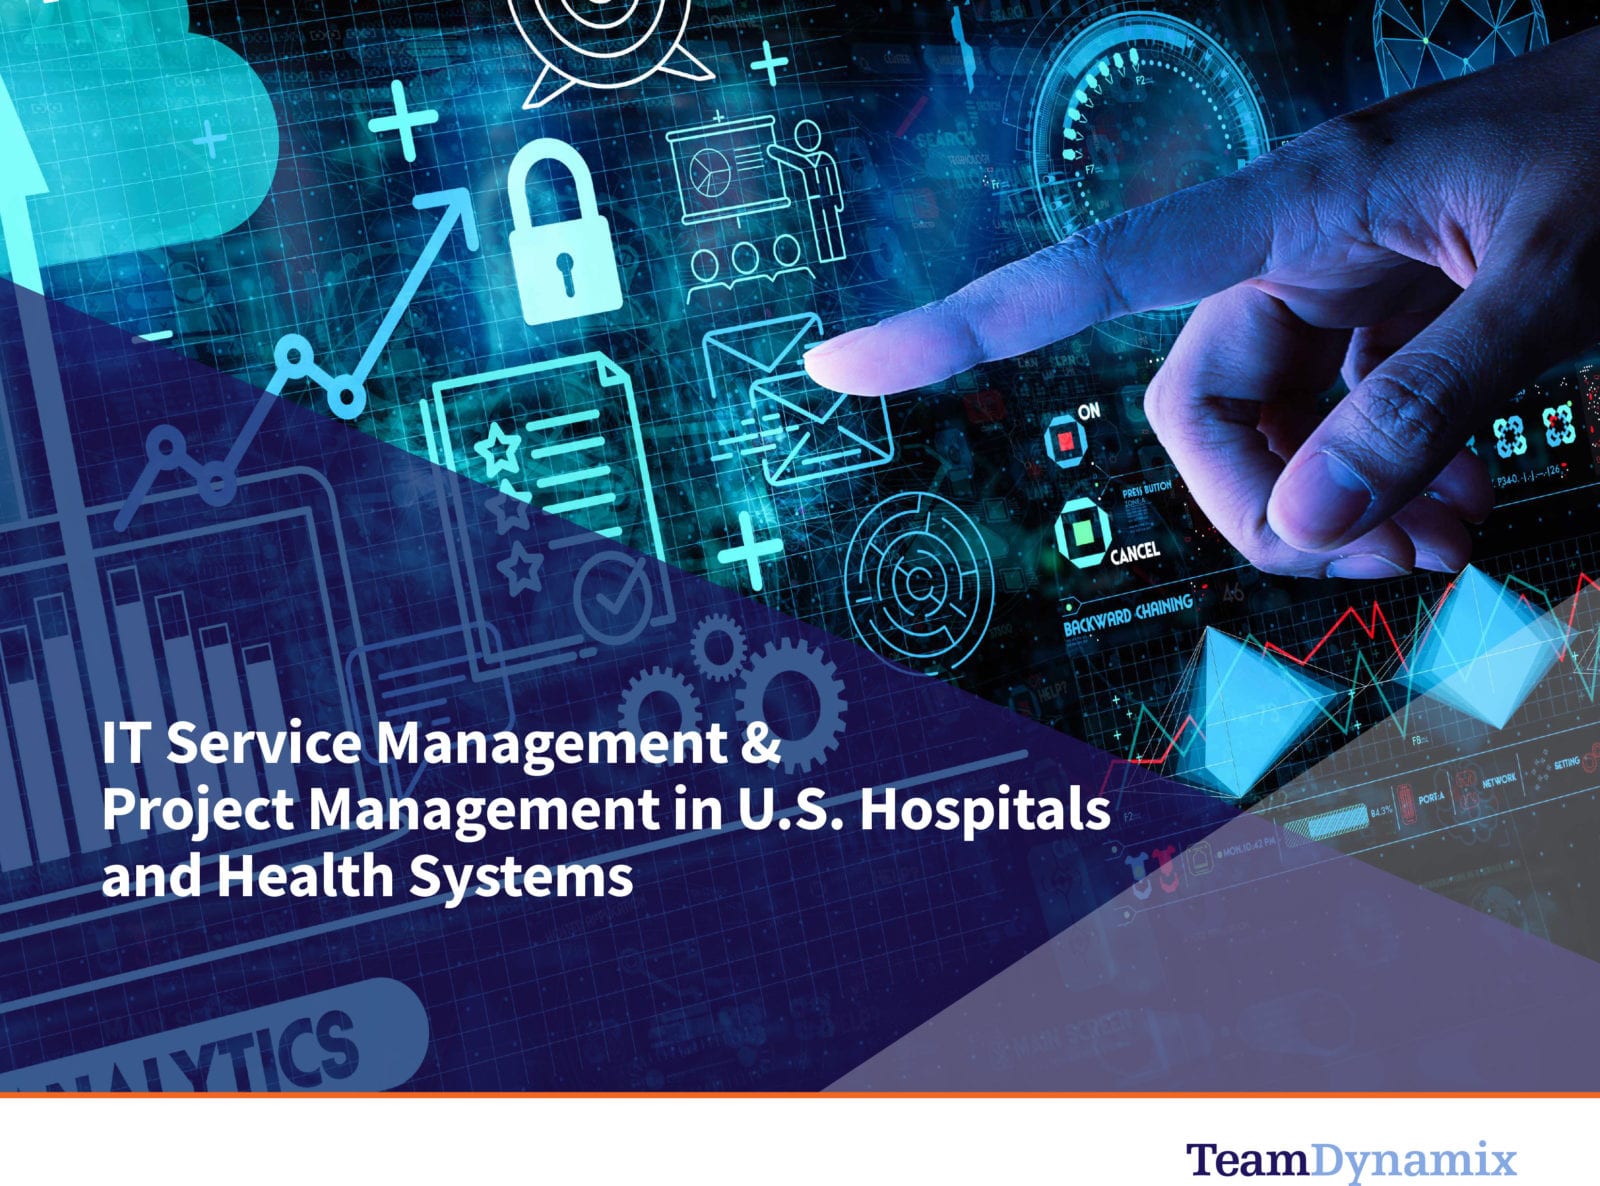 IT Service Management & Project Management in Hospitals & Health Systems: eBook Download